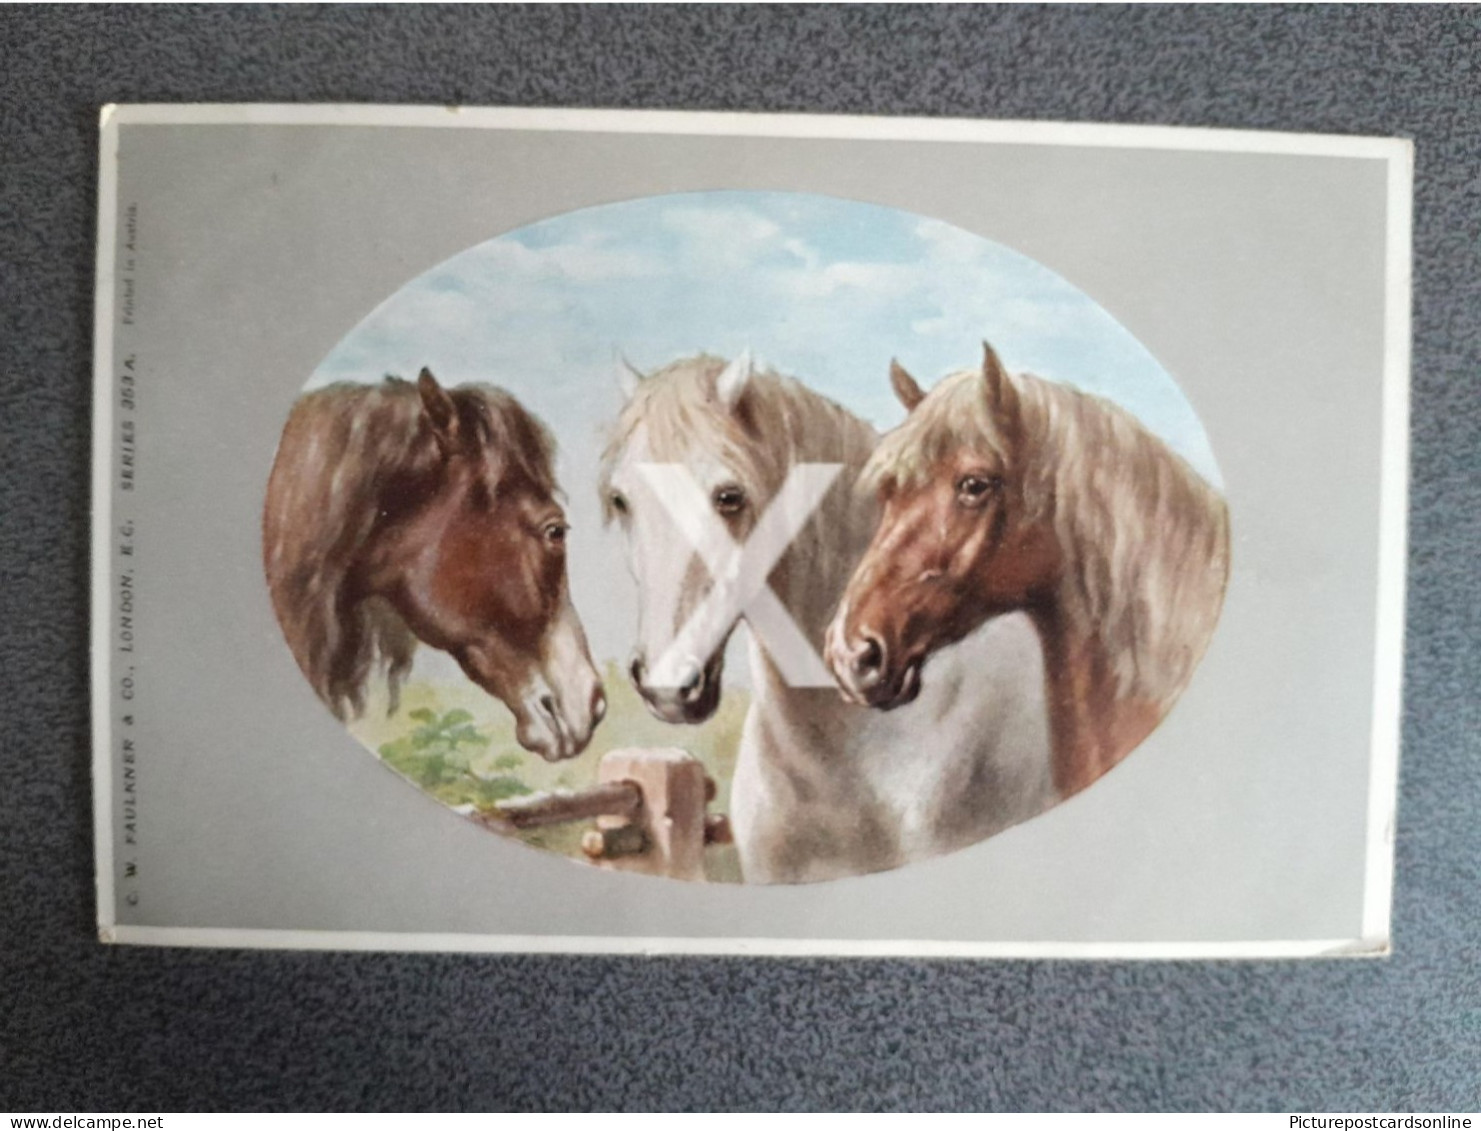 THREE HORSES OLD COLOUR POSTCARD ANIMALS FAULKNER SERIES NO 353A SALE SQUARED CIRCLE POSTMARK - Chevaux